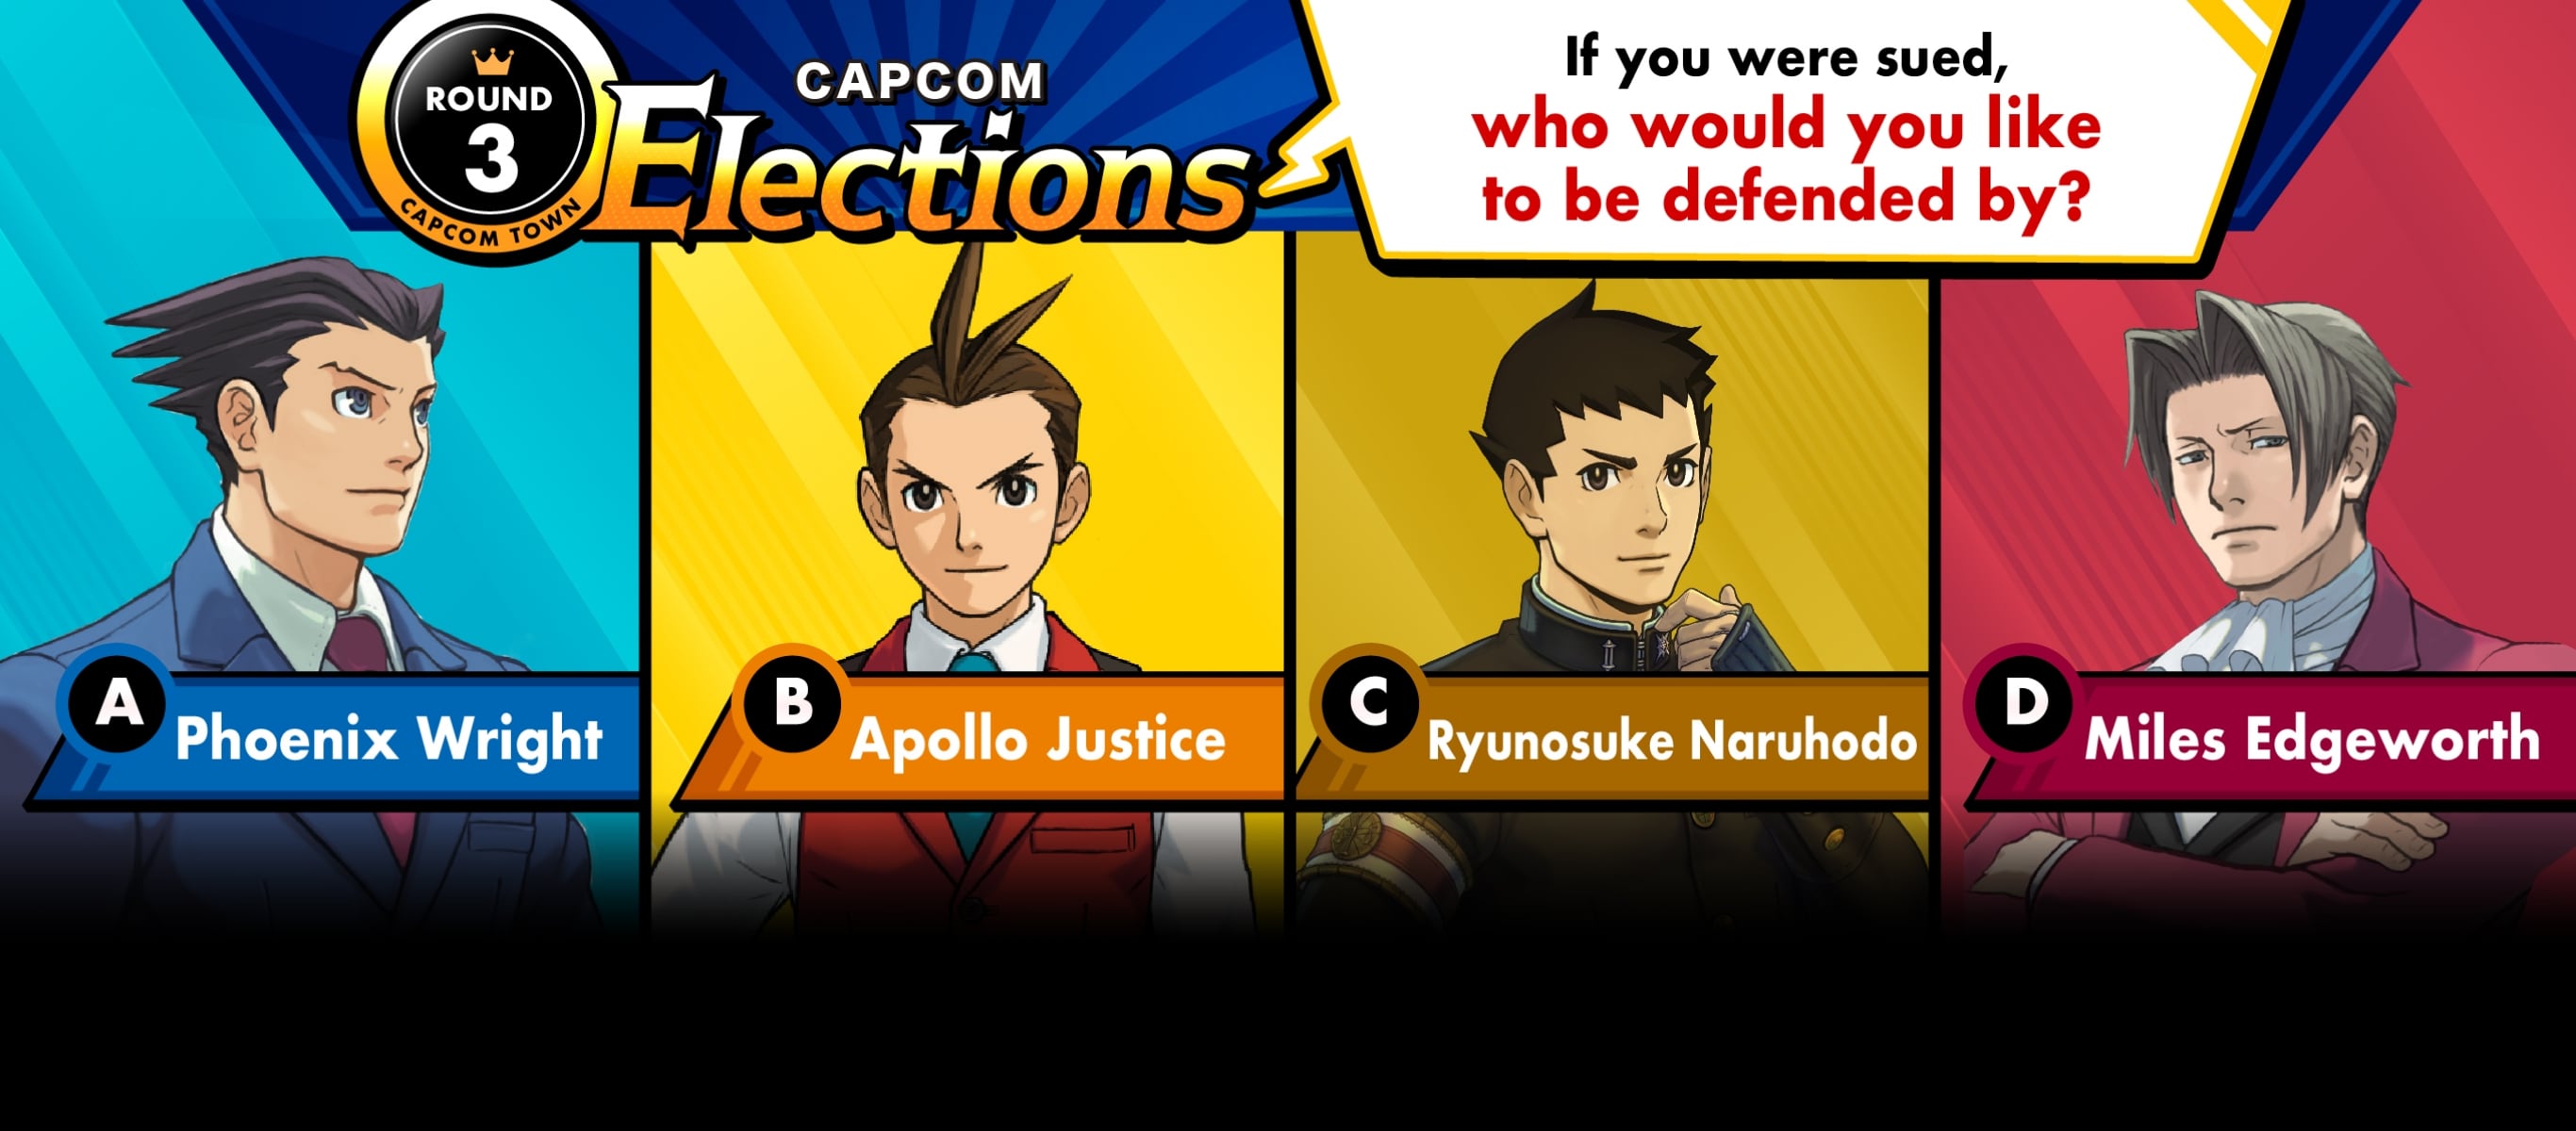 Capcom Elections Round 3: If you were sued, who would you like to be defended by?